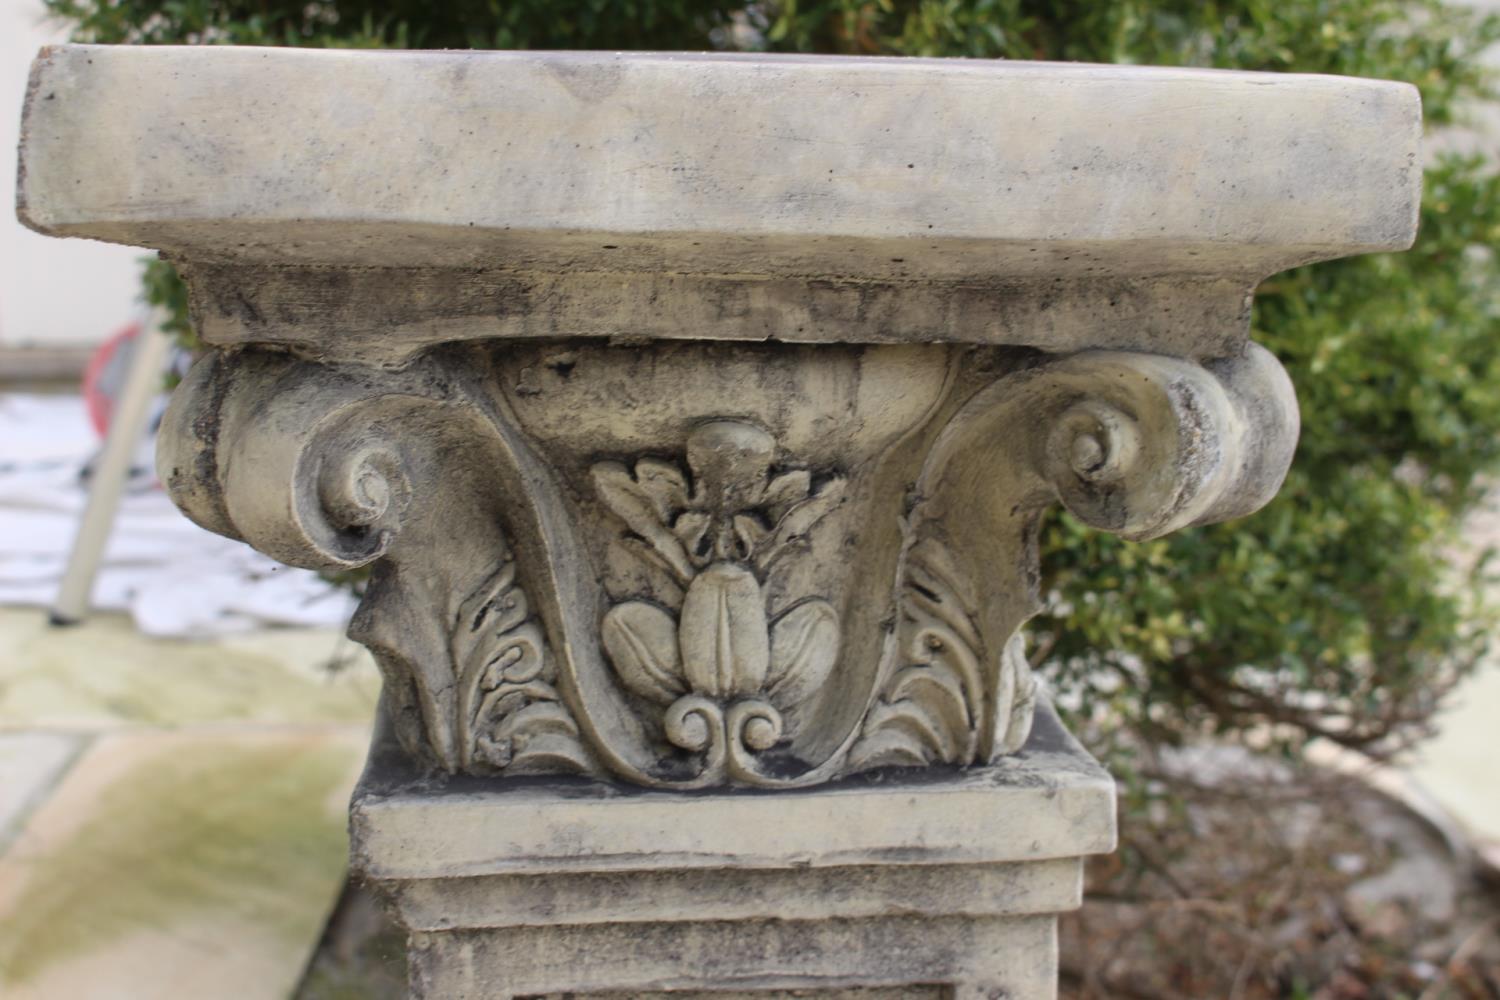 Composition plinth in the Rococo style. [64 cm H x 30 cm W x 30 cm D}. - Image 2 of 2